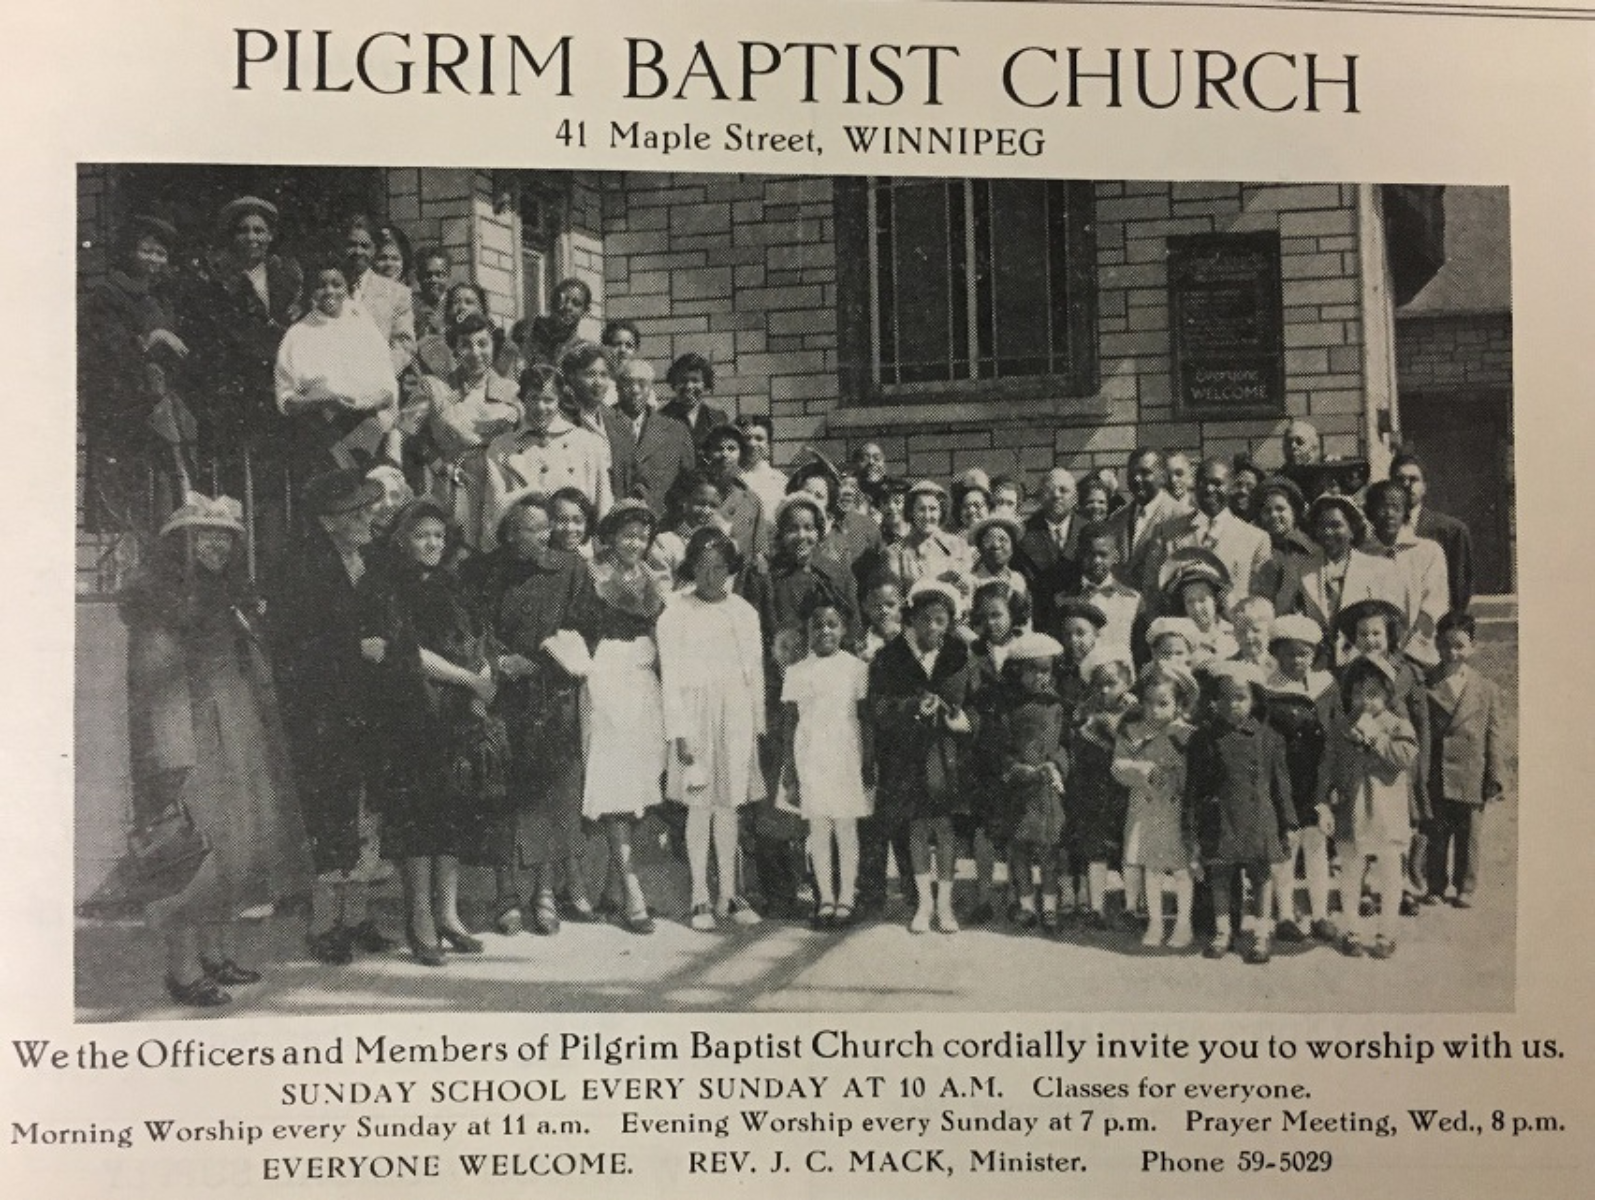 A photograph of a large group of primarily Black adults and children smiling outside of a brick building. Text above the photo reads, "Pilgrim Baptist Church". Text below reads, "We the Officers and Members of Pilgrim Baptist Church cordially invite you to worship with us."